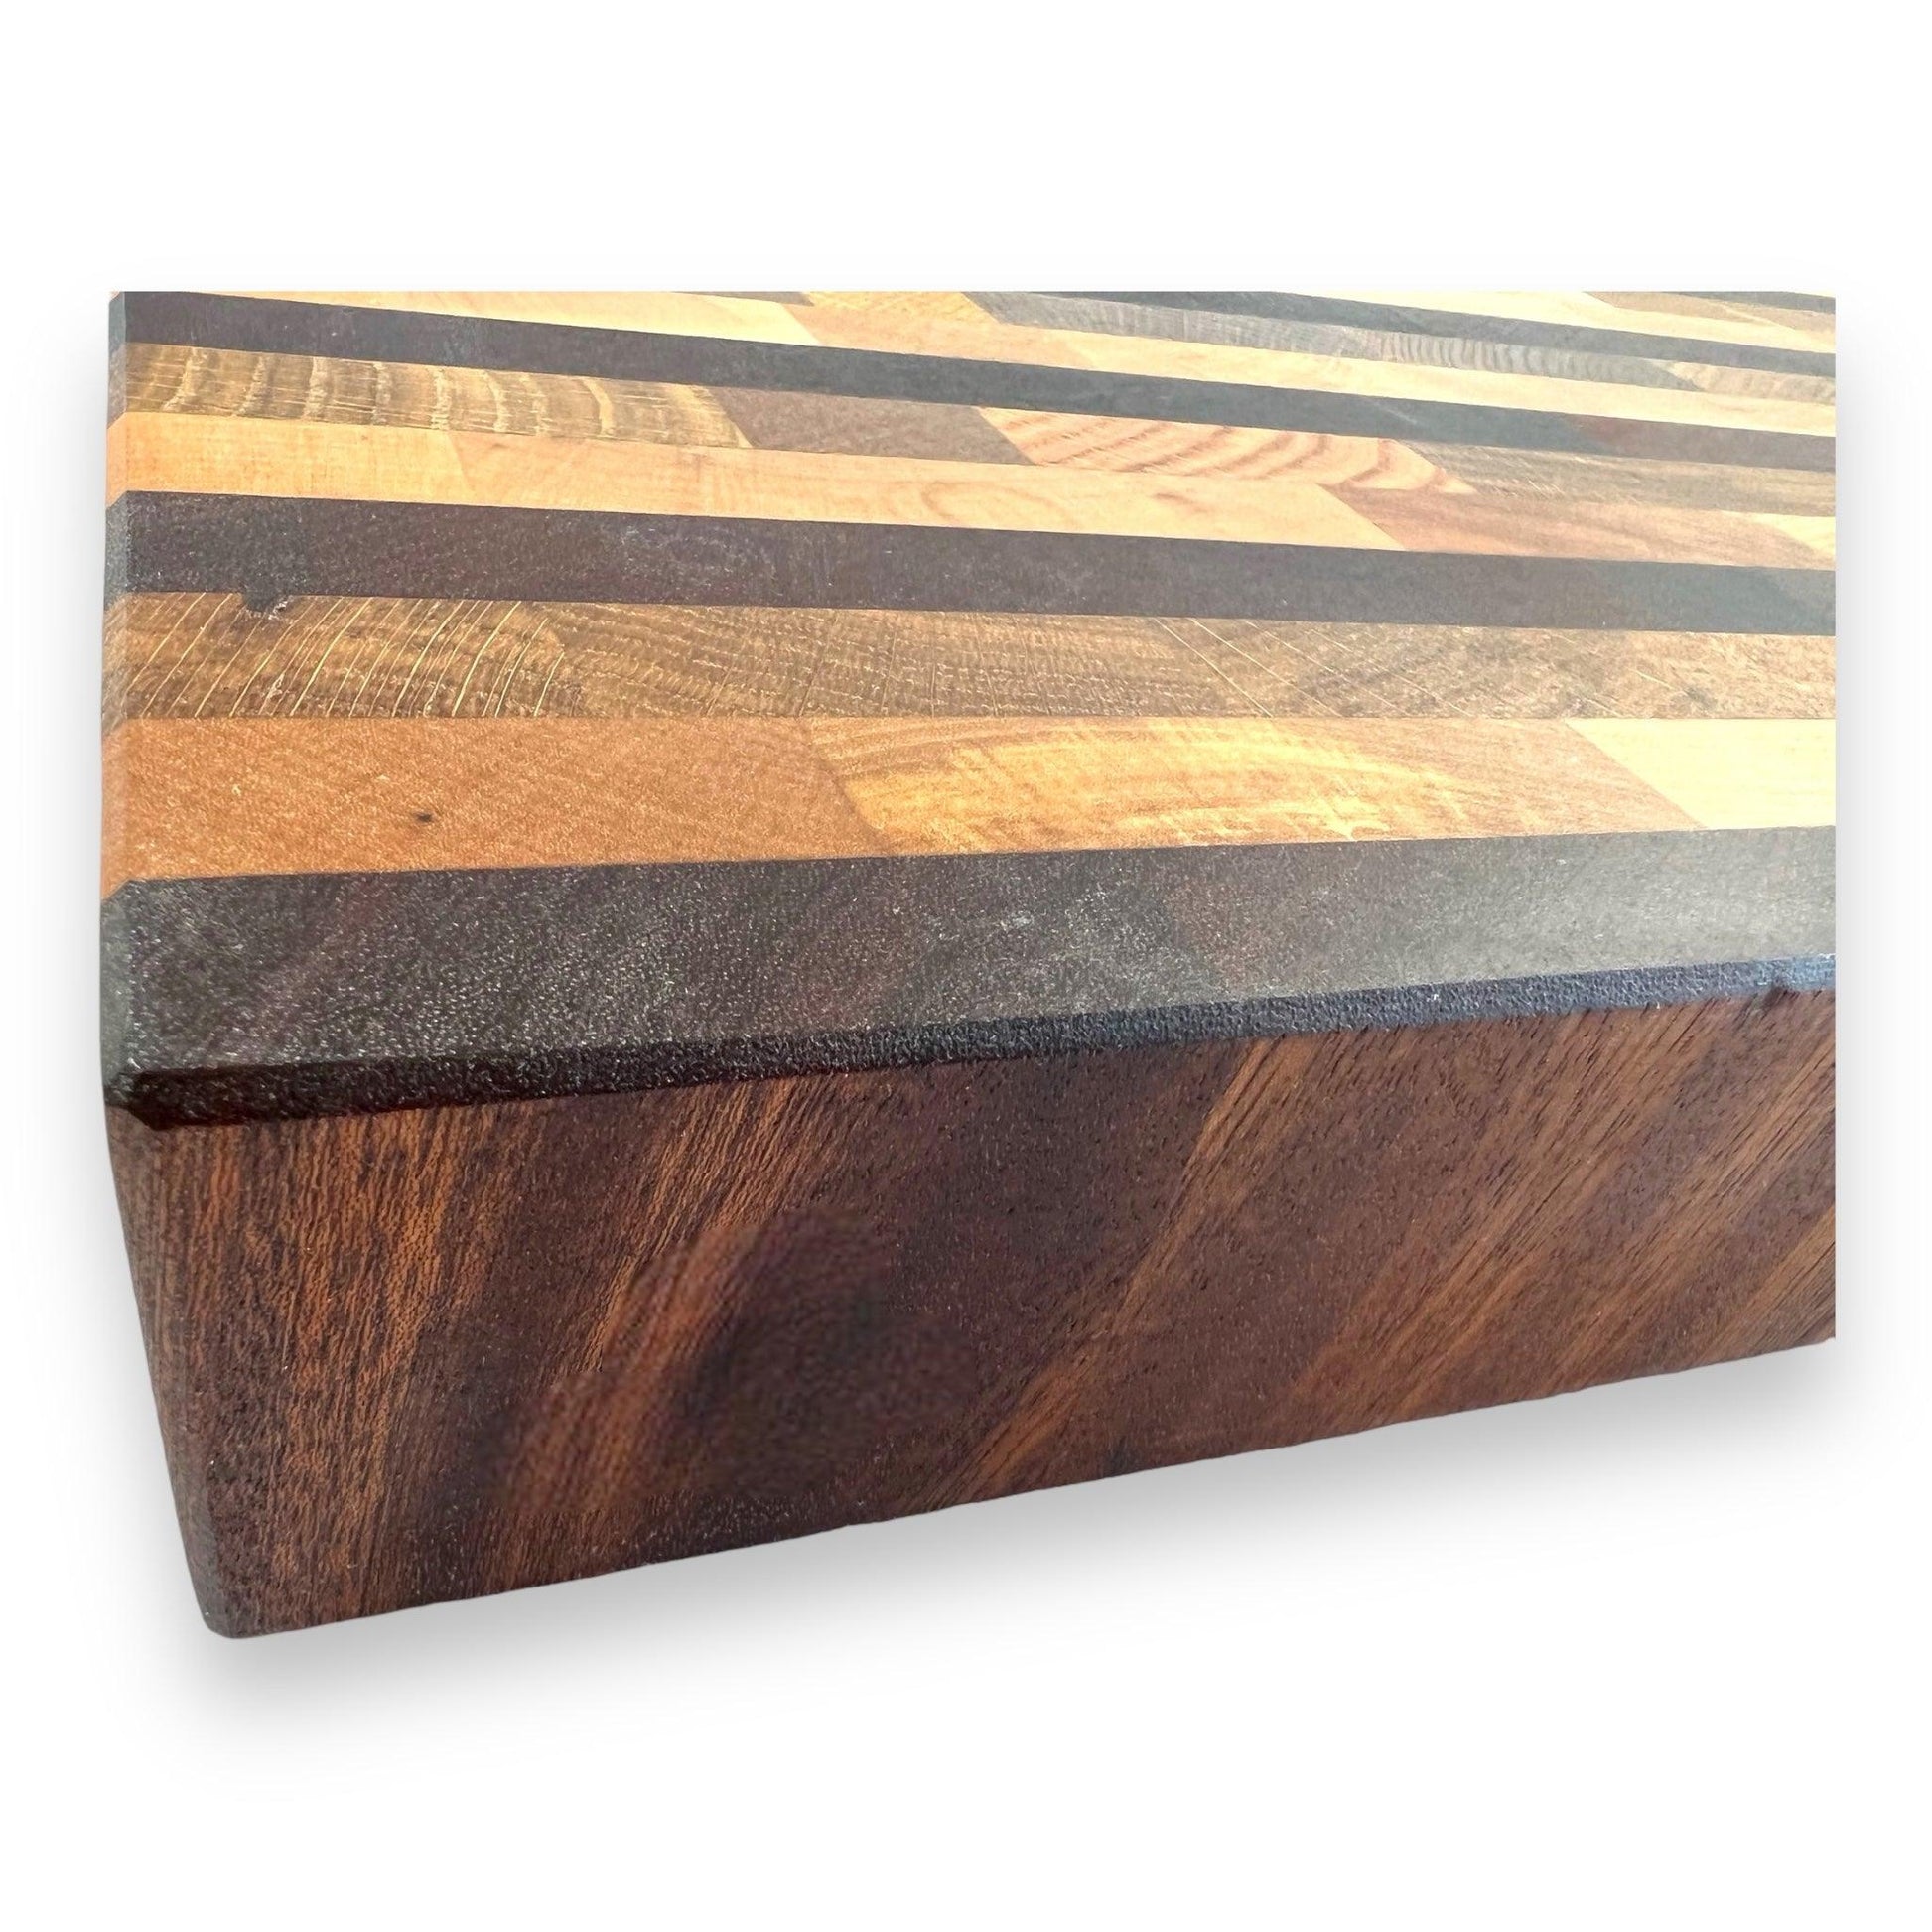 Rectangular mixed standing wood cutting board with 2'' pattern - BOISWOOD